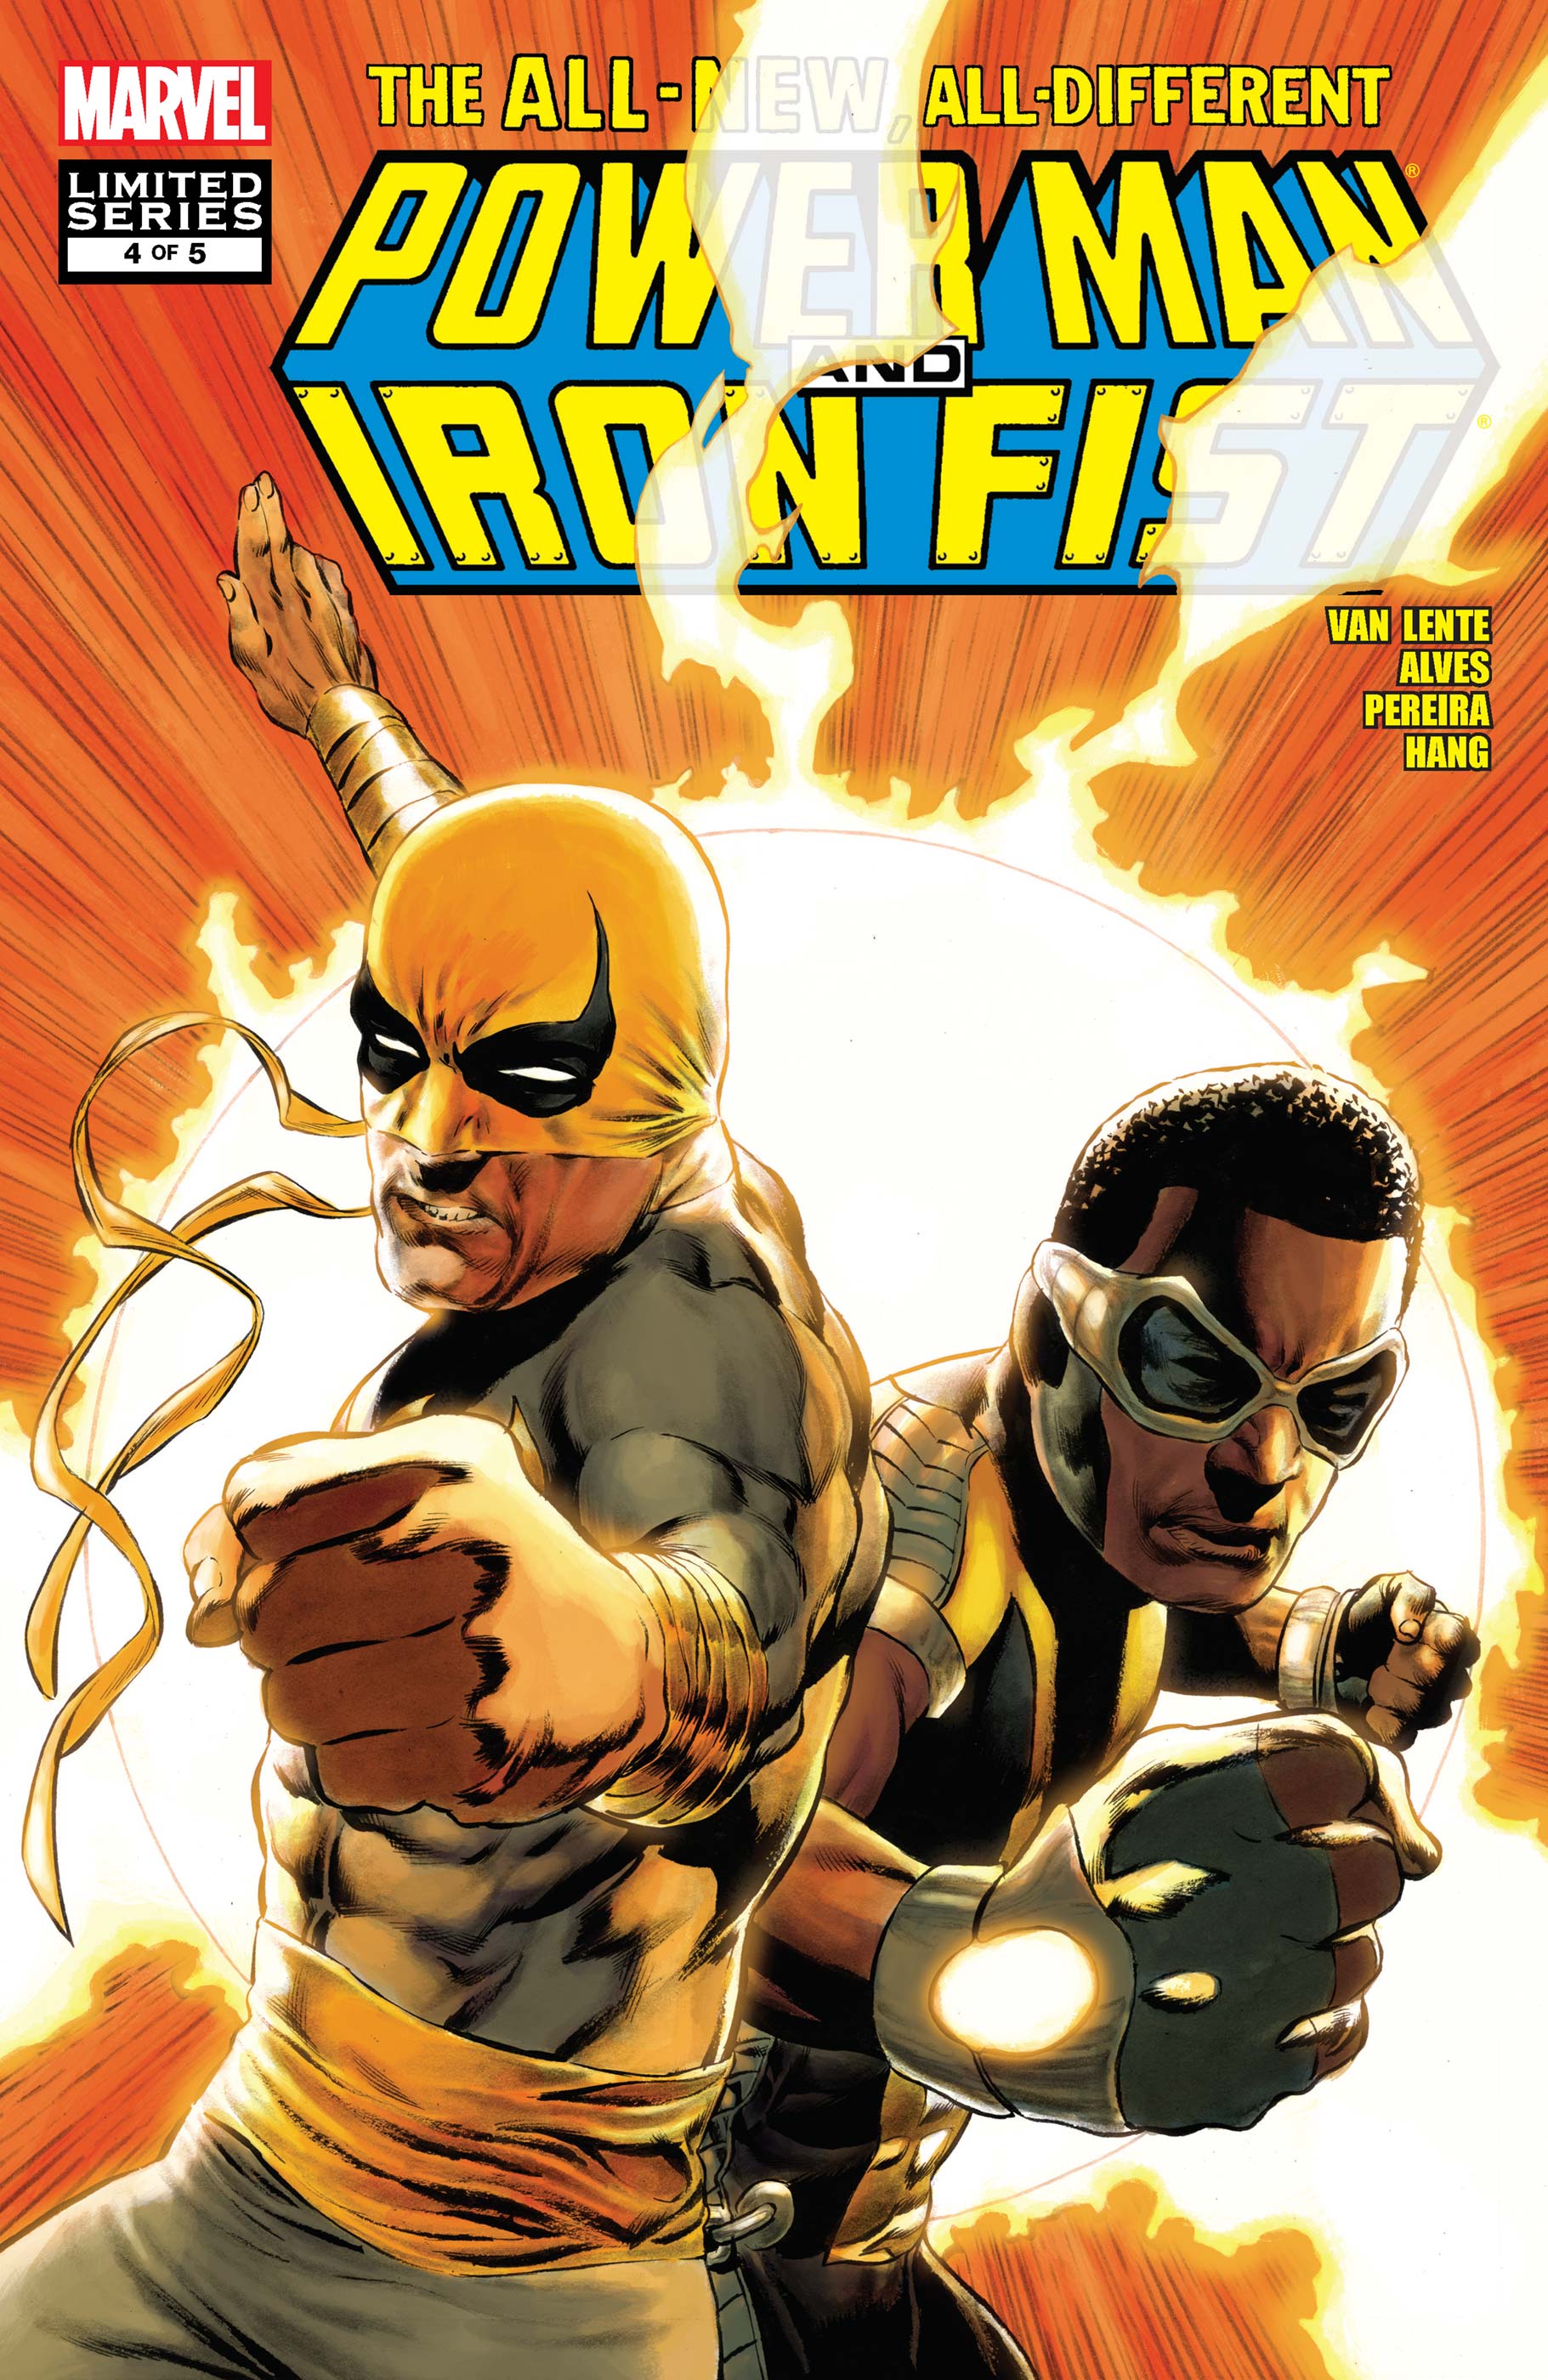 Power Man and Iron Fist (2010) #4